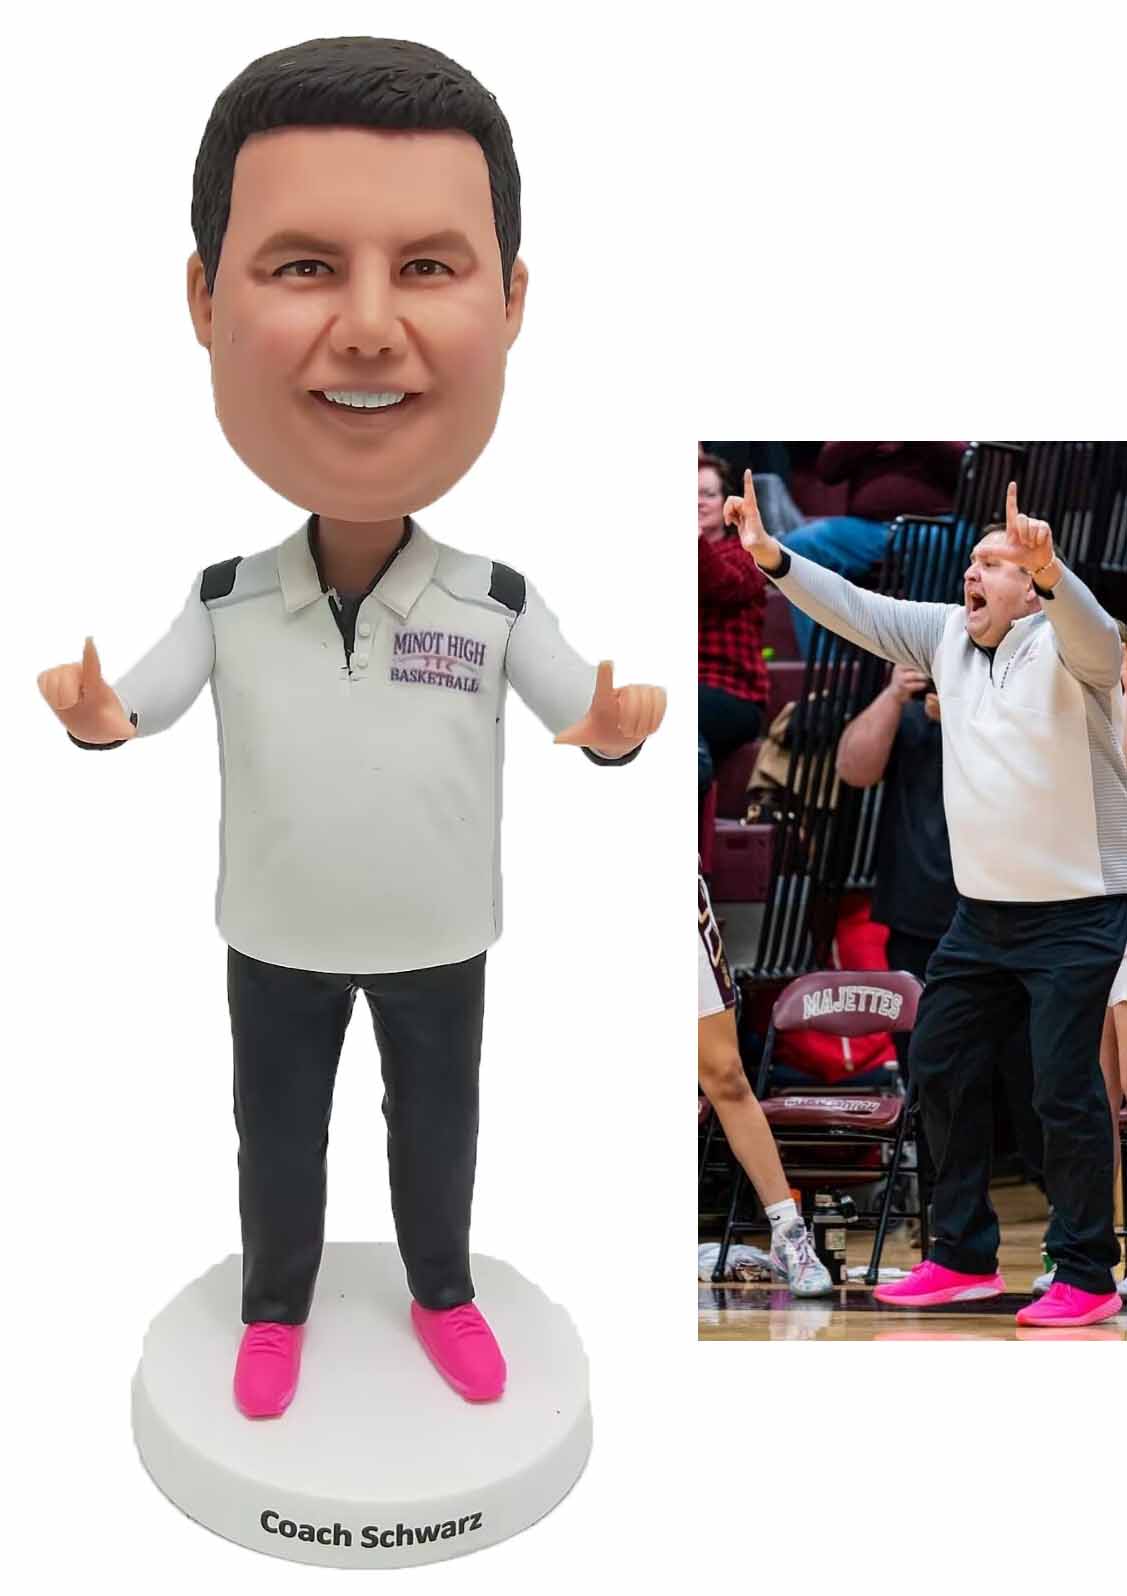 Personalized Bobbleheads For Coach